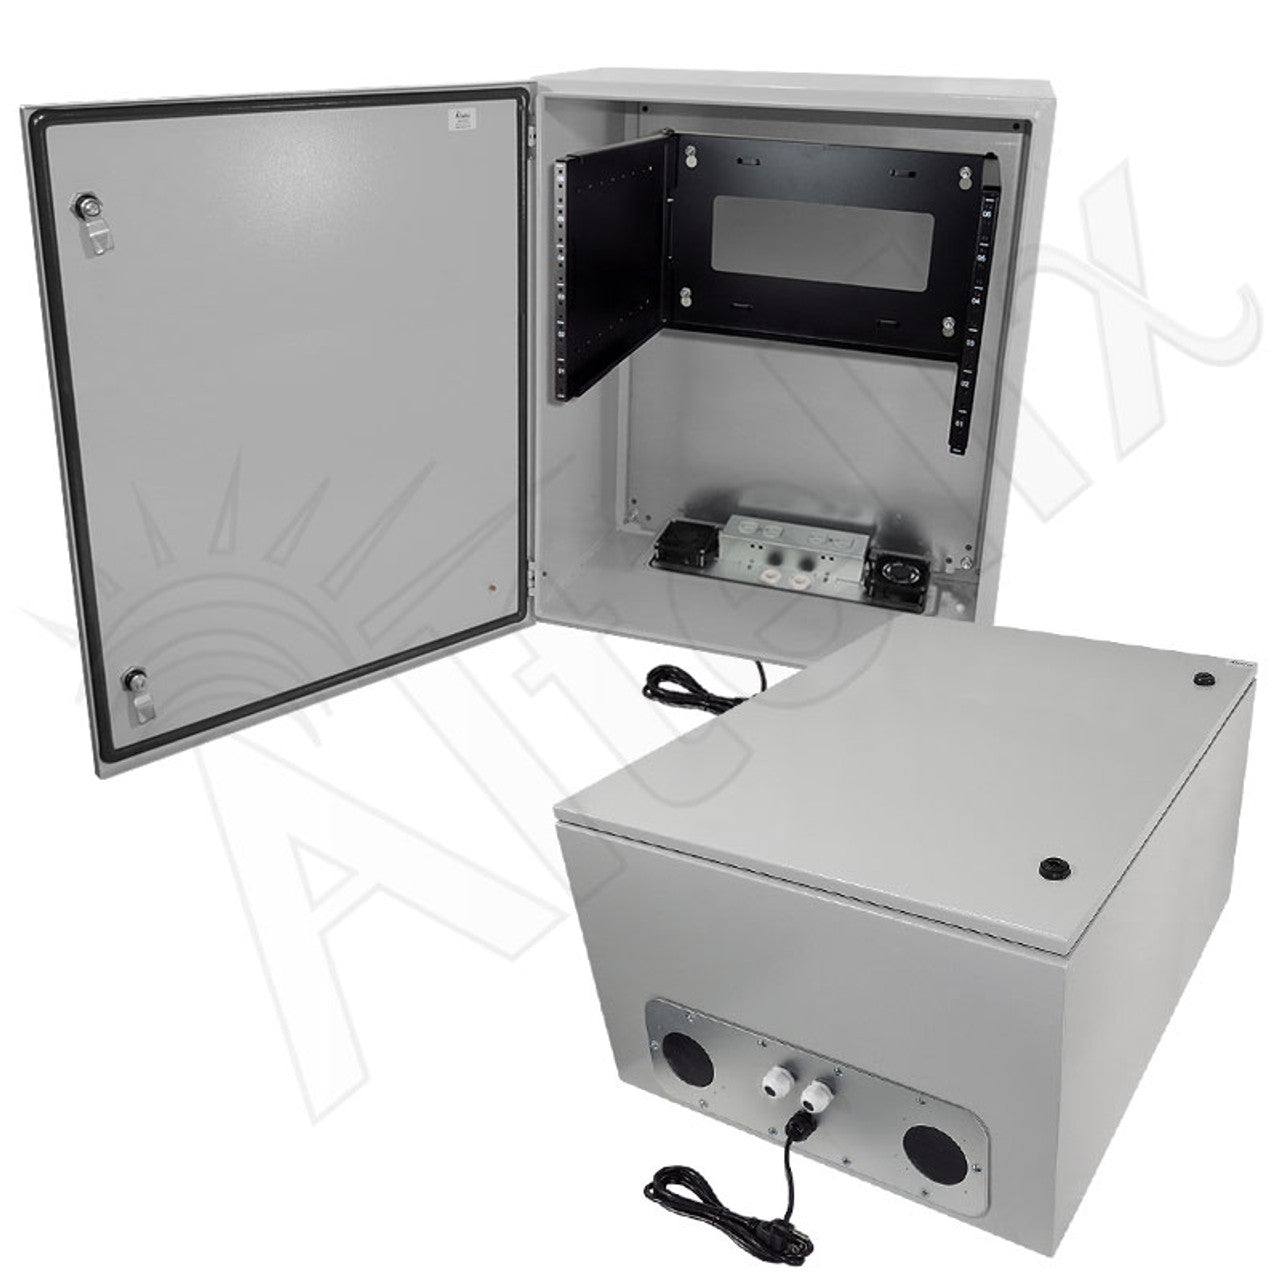 Altelix 19" Wide 6U Rack Steel Weatherproof NEMA Enclosure with Dual Cooling Fans, 120 VAC Outlets and Power Cord-4